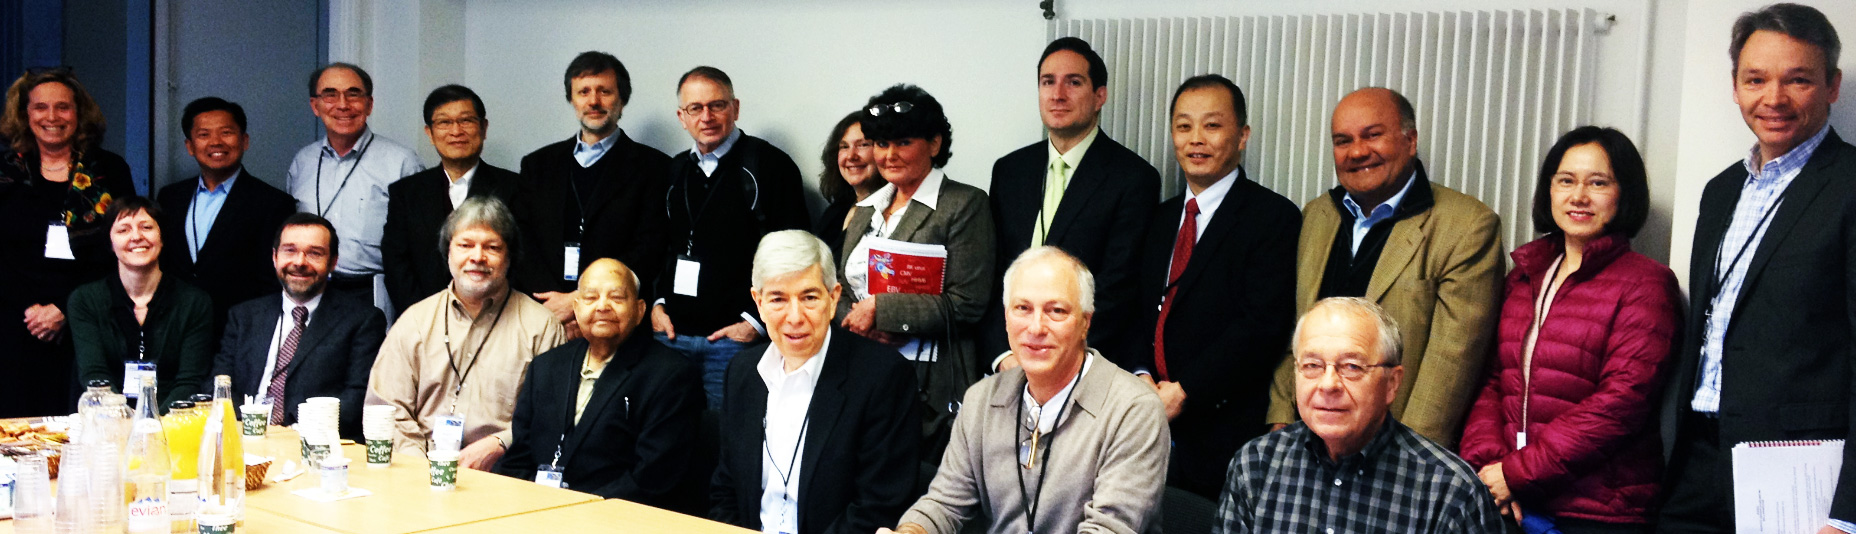 The HHV-6 Foundation Scientific Advisory Board at the 2013 International Conference on HHV-6 in Paris